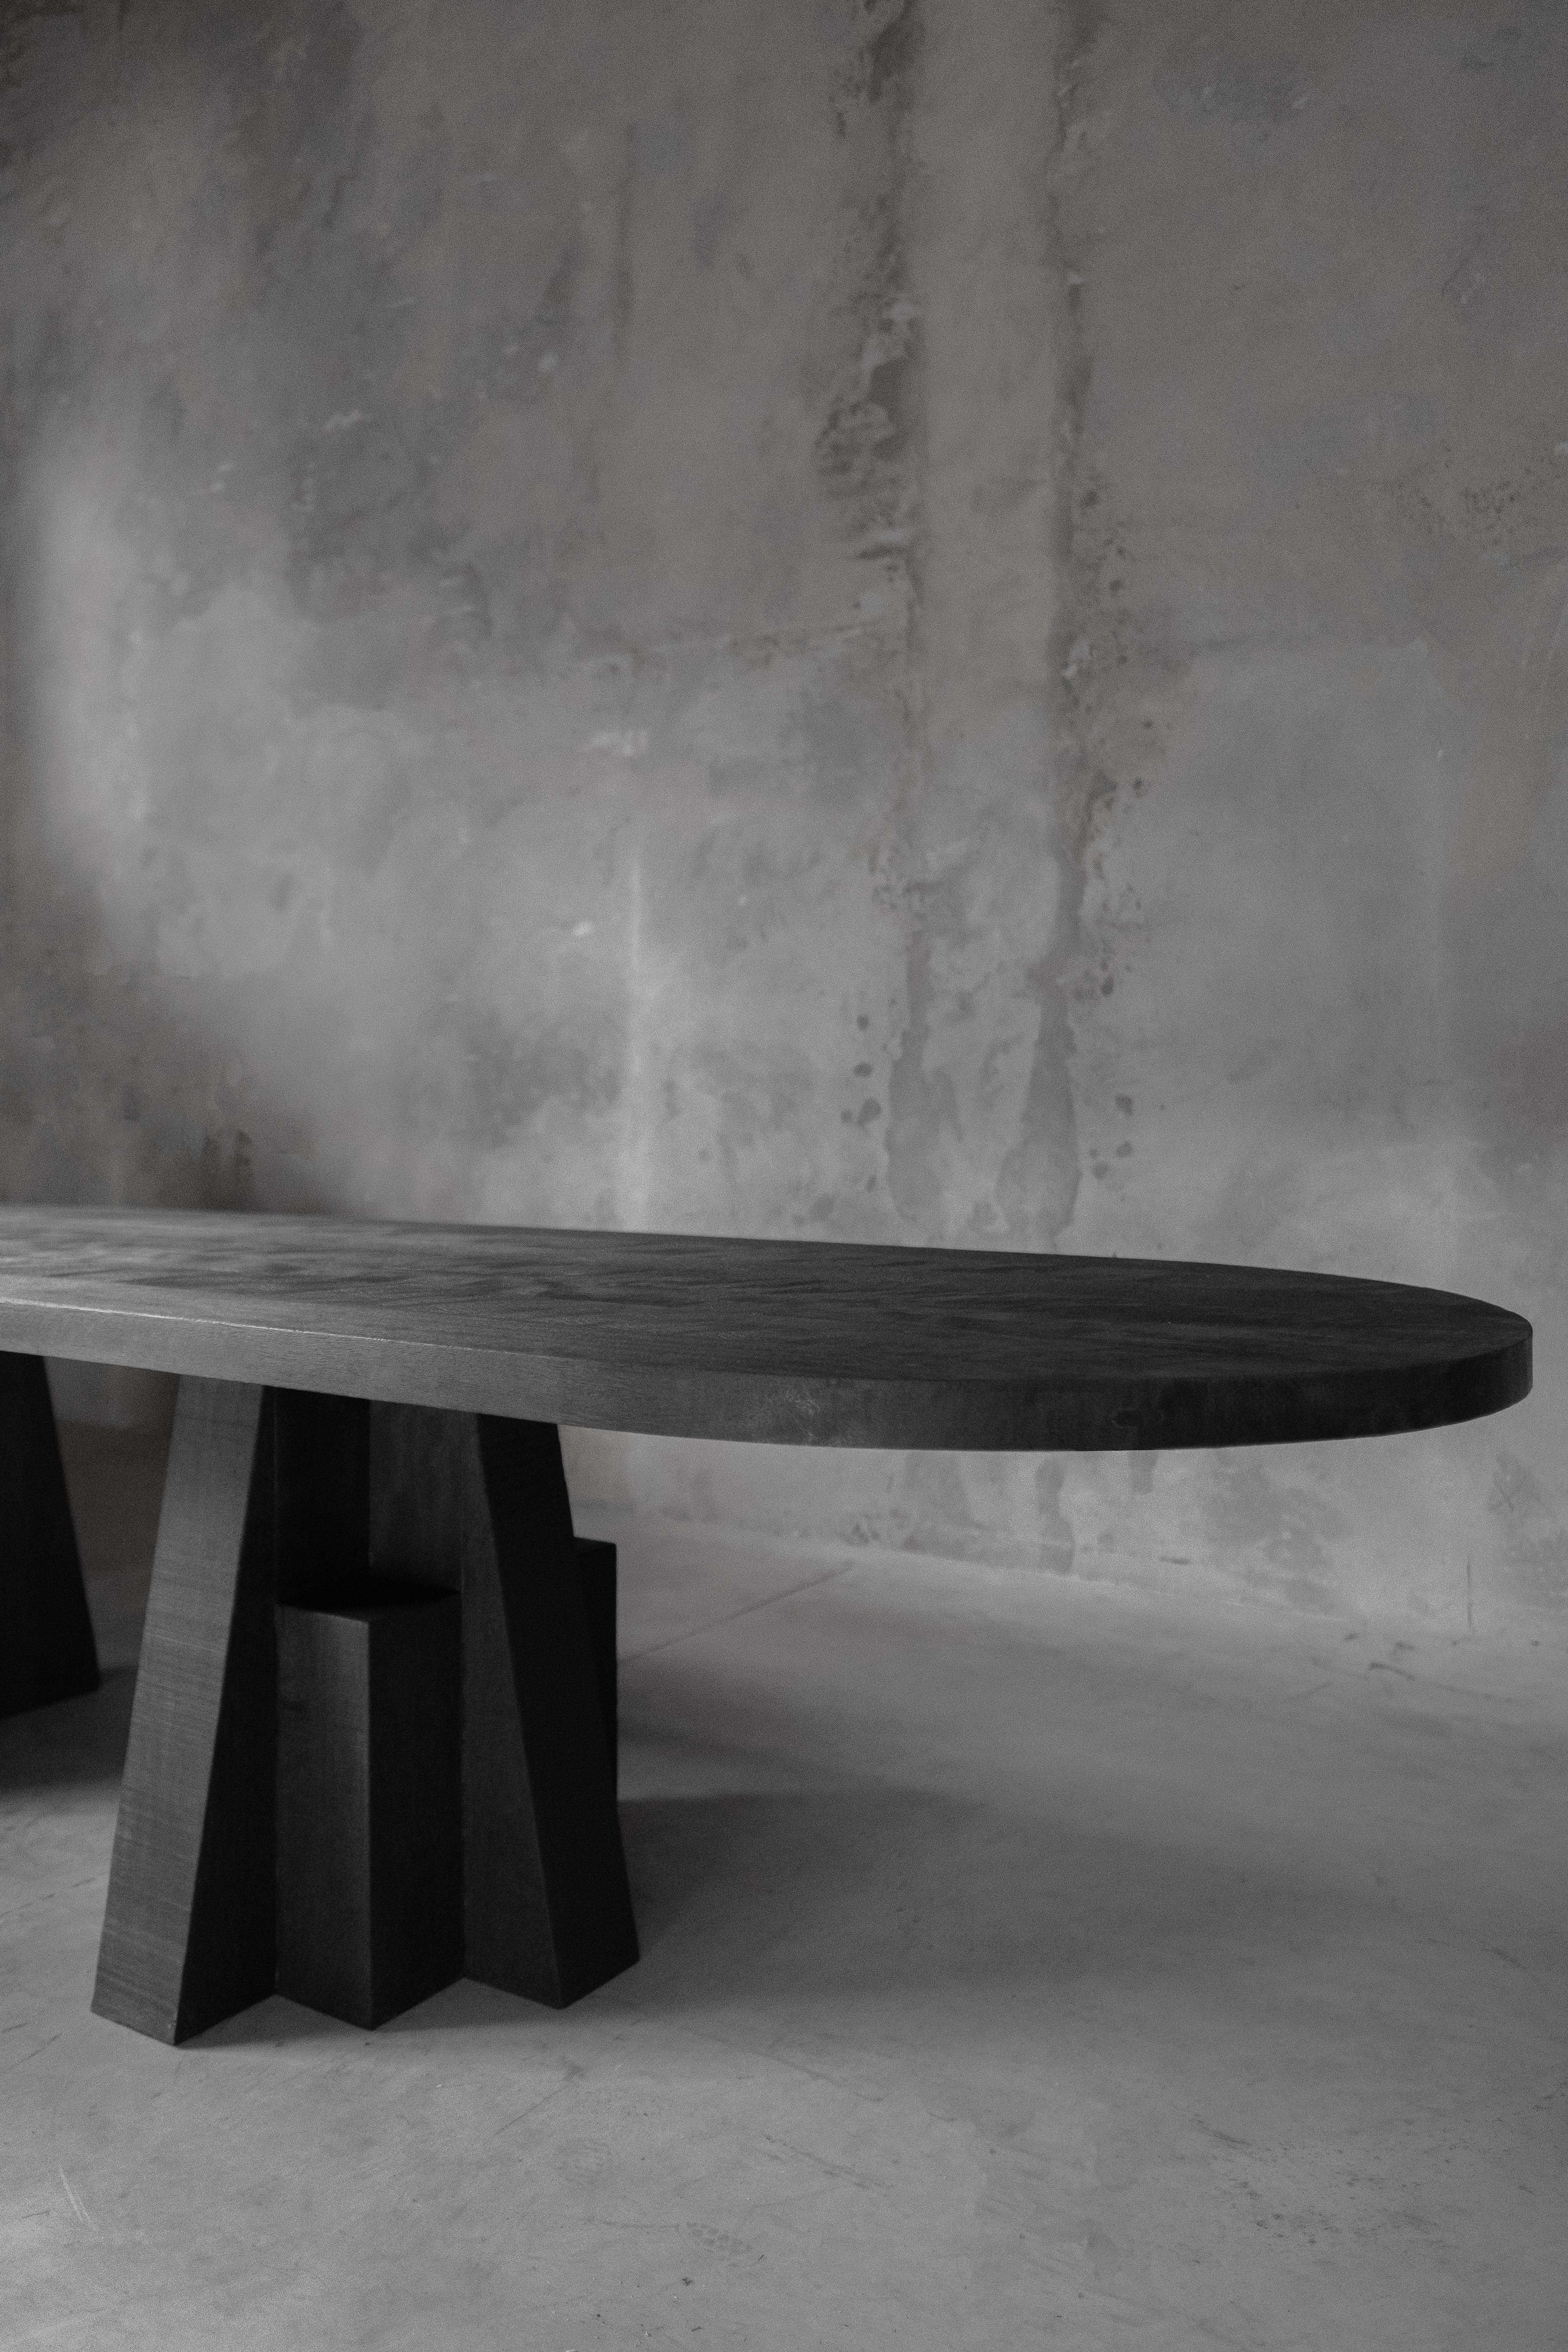 AD black oak dining table, hand-sculpted, signed Arno Declercq
AD Table 2.0
Measures: Small 340 cm W x 73 cm H x 105 cm D, 133.86” W x 28.7” H x 41.3” D
Large 340 cm W x 73 cm H x 120 cm D, 133.86” W x 28.7” H x 47.2” D
Belgium